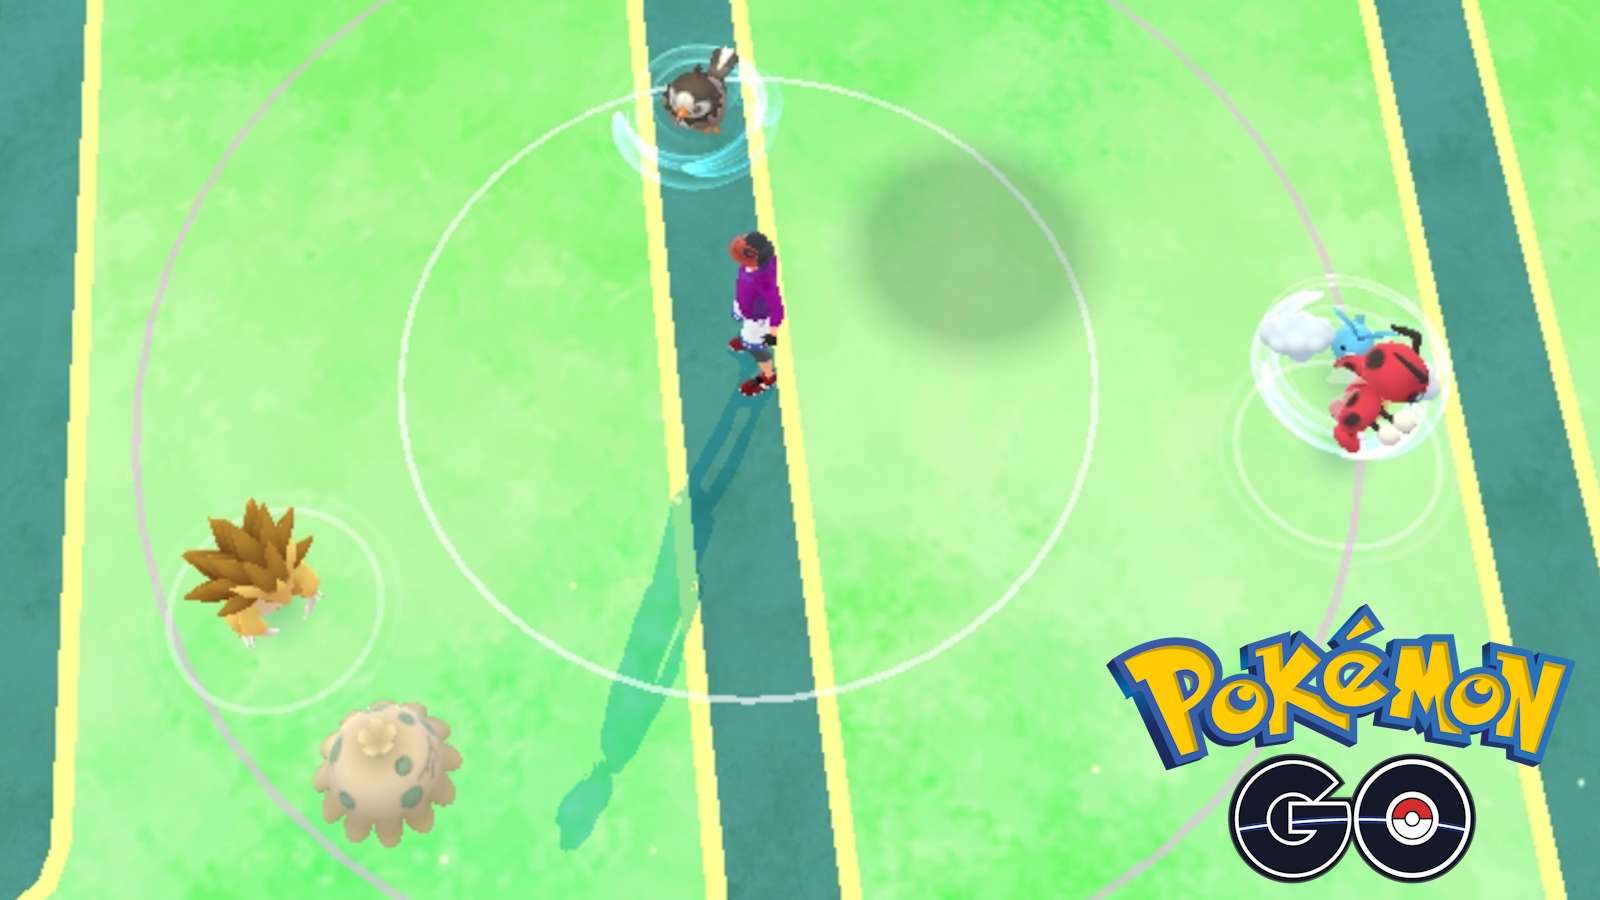 Pokemon GO gameplay in open world with official logo in bottom right corner.